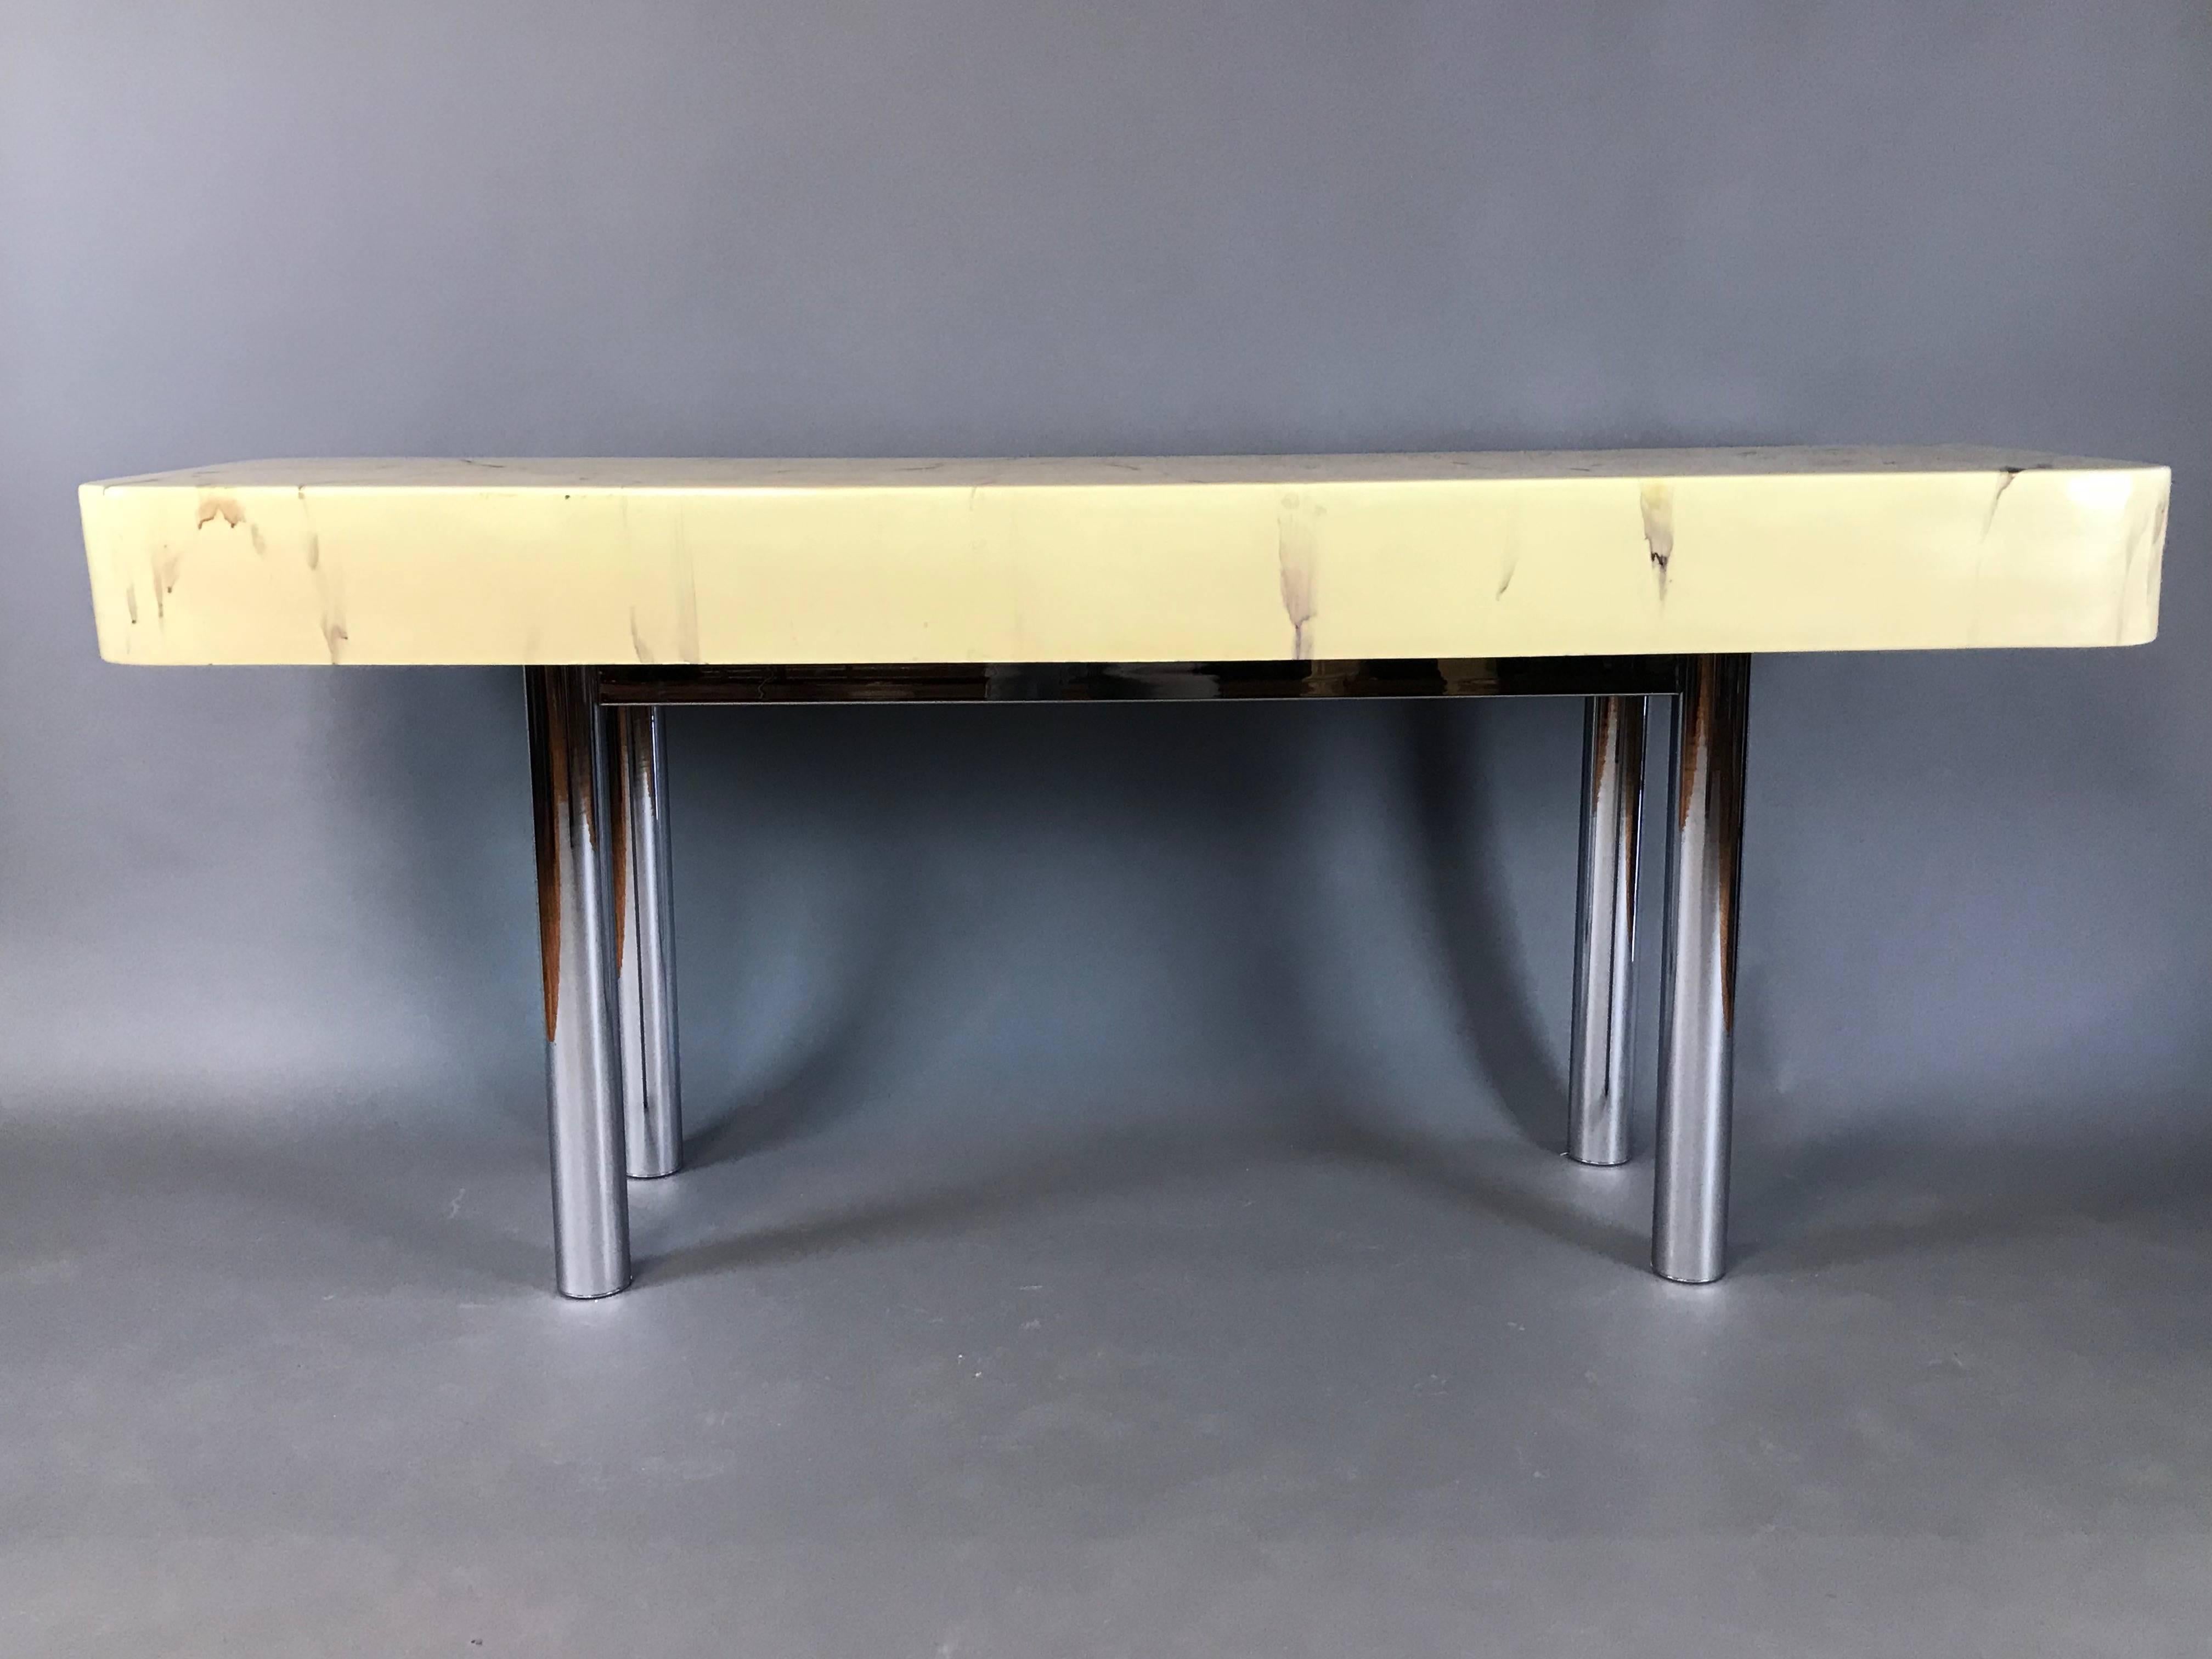 1970s console table

Marbleized resin on wood, polished chrome base, finished on all sides.